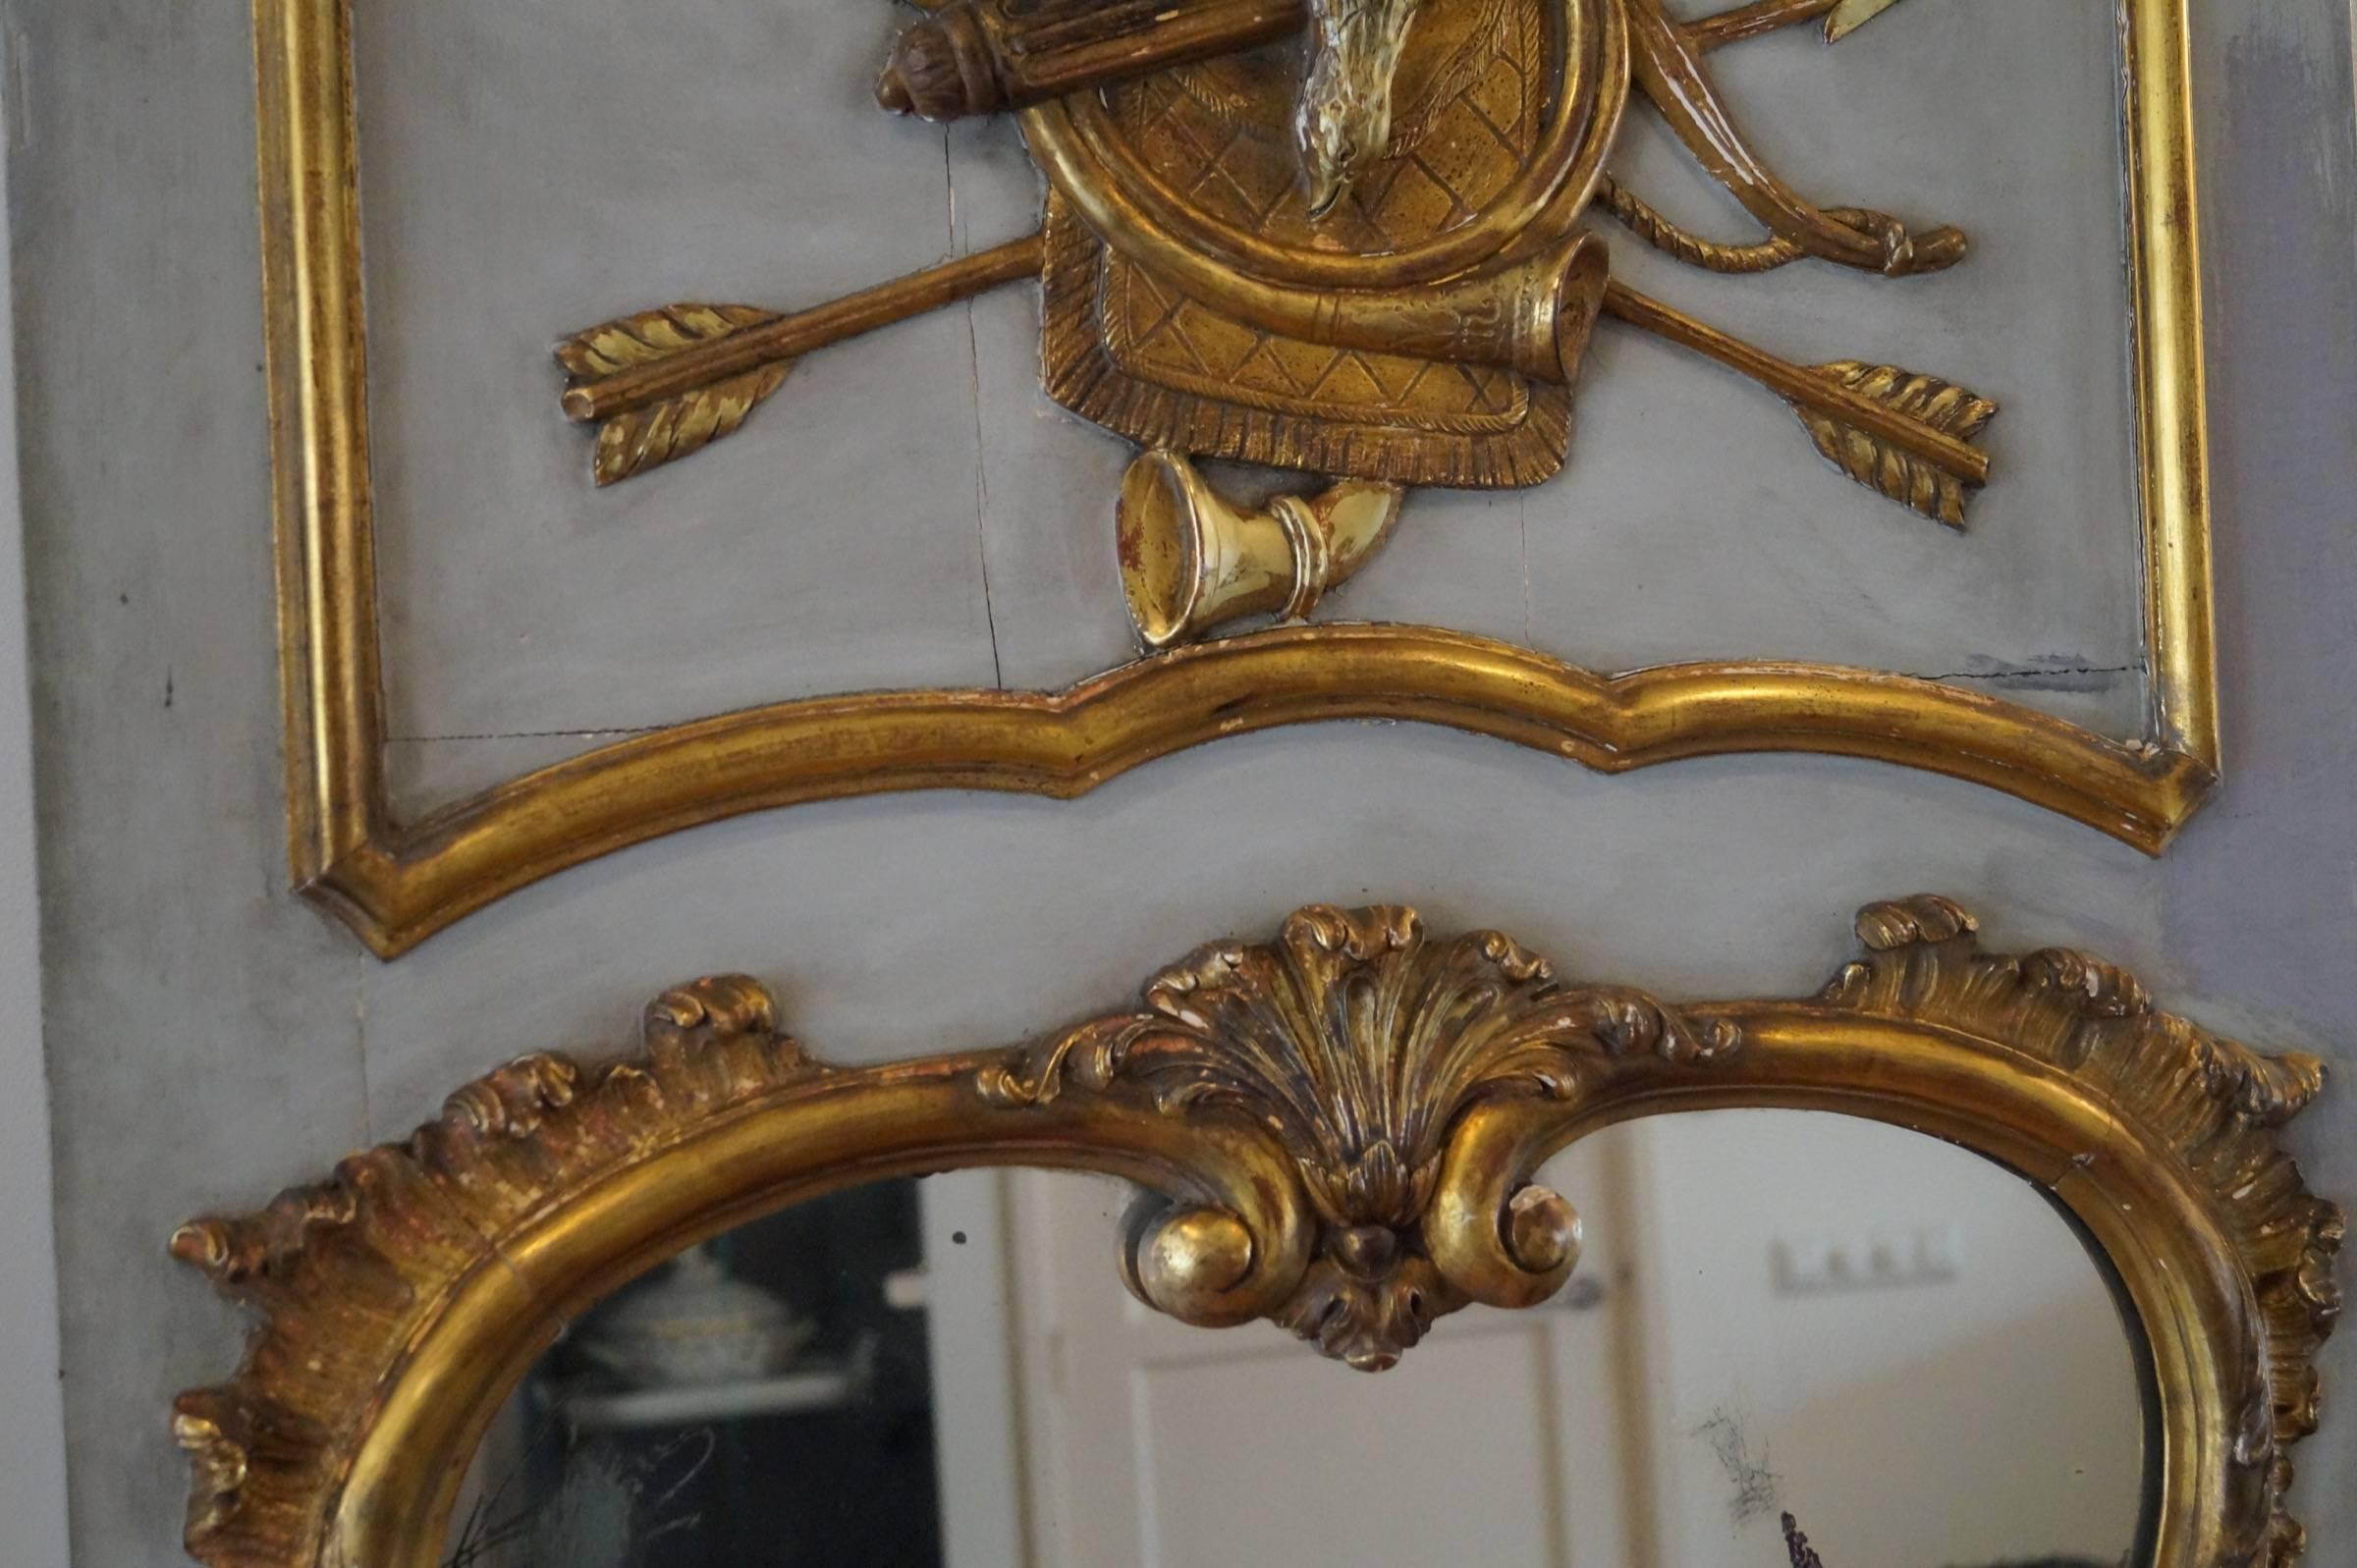 Wood Rococo Mirror Hand-Carved and Gilded, Trumeau or over Mantel with Hunting Decor